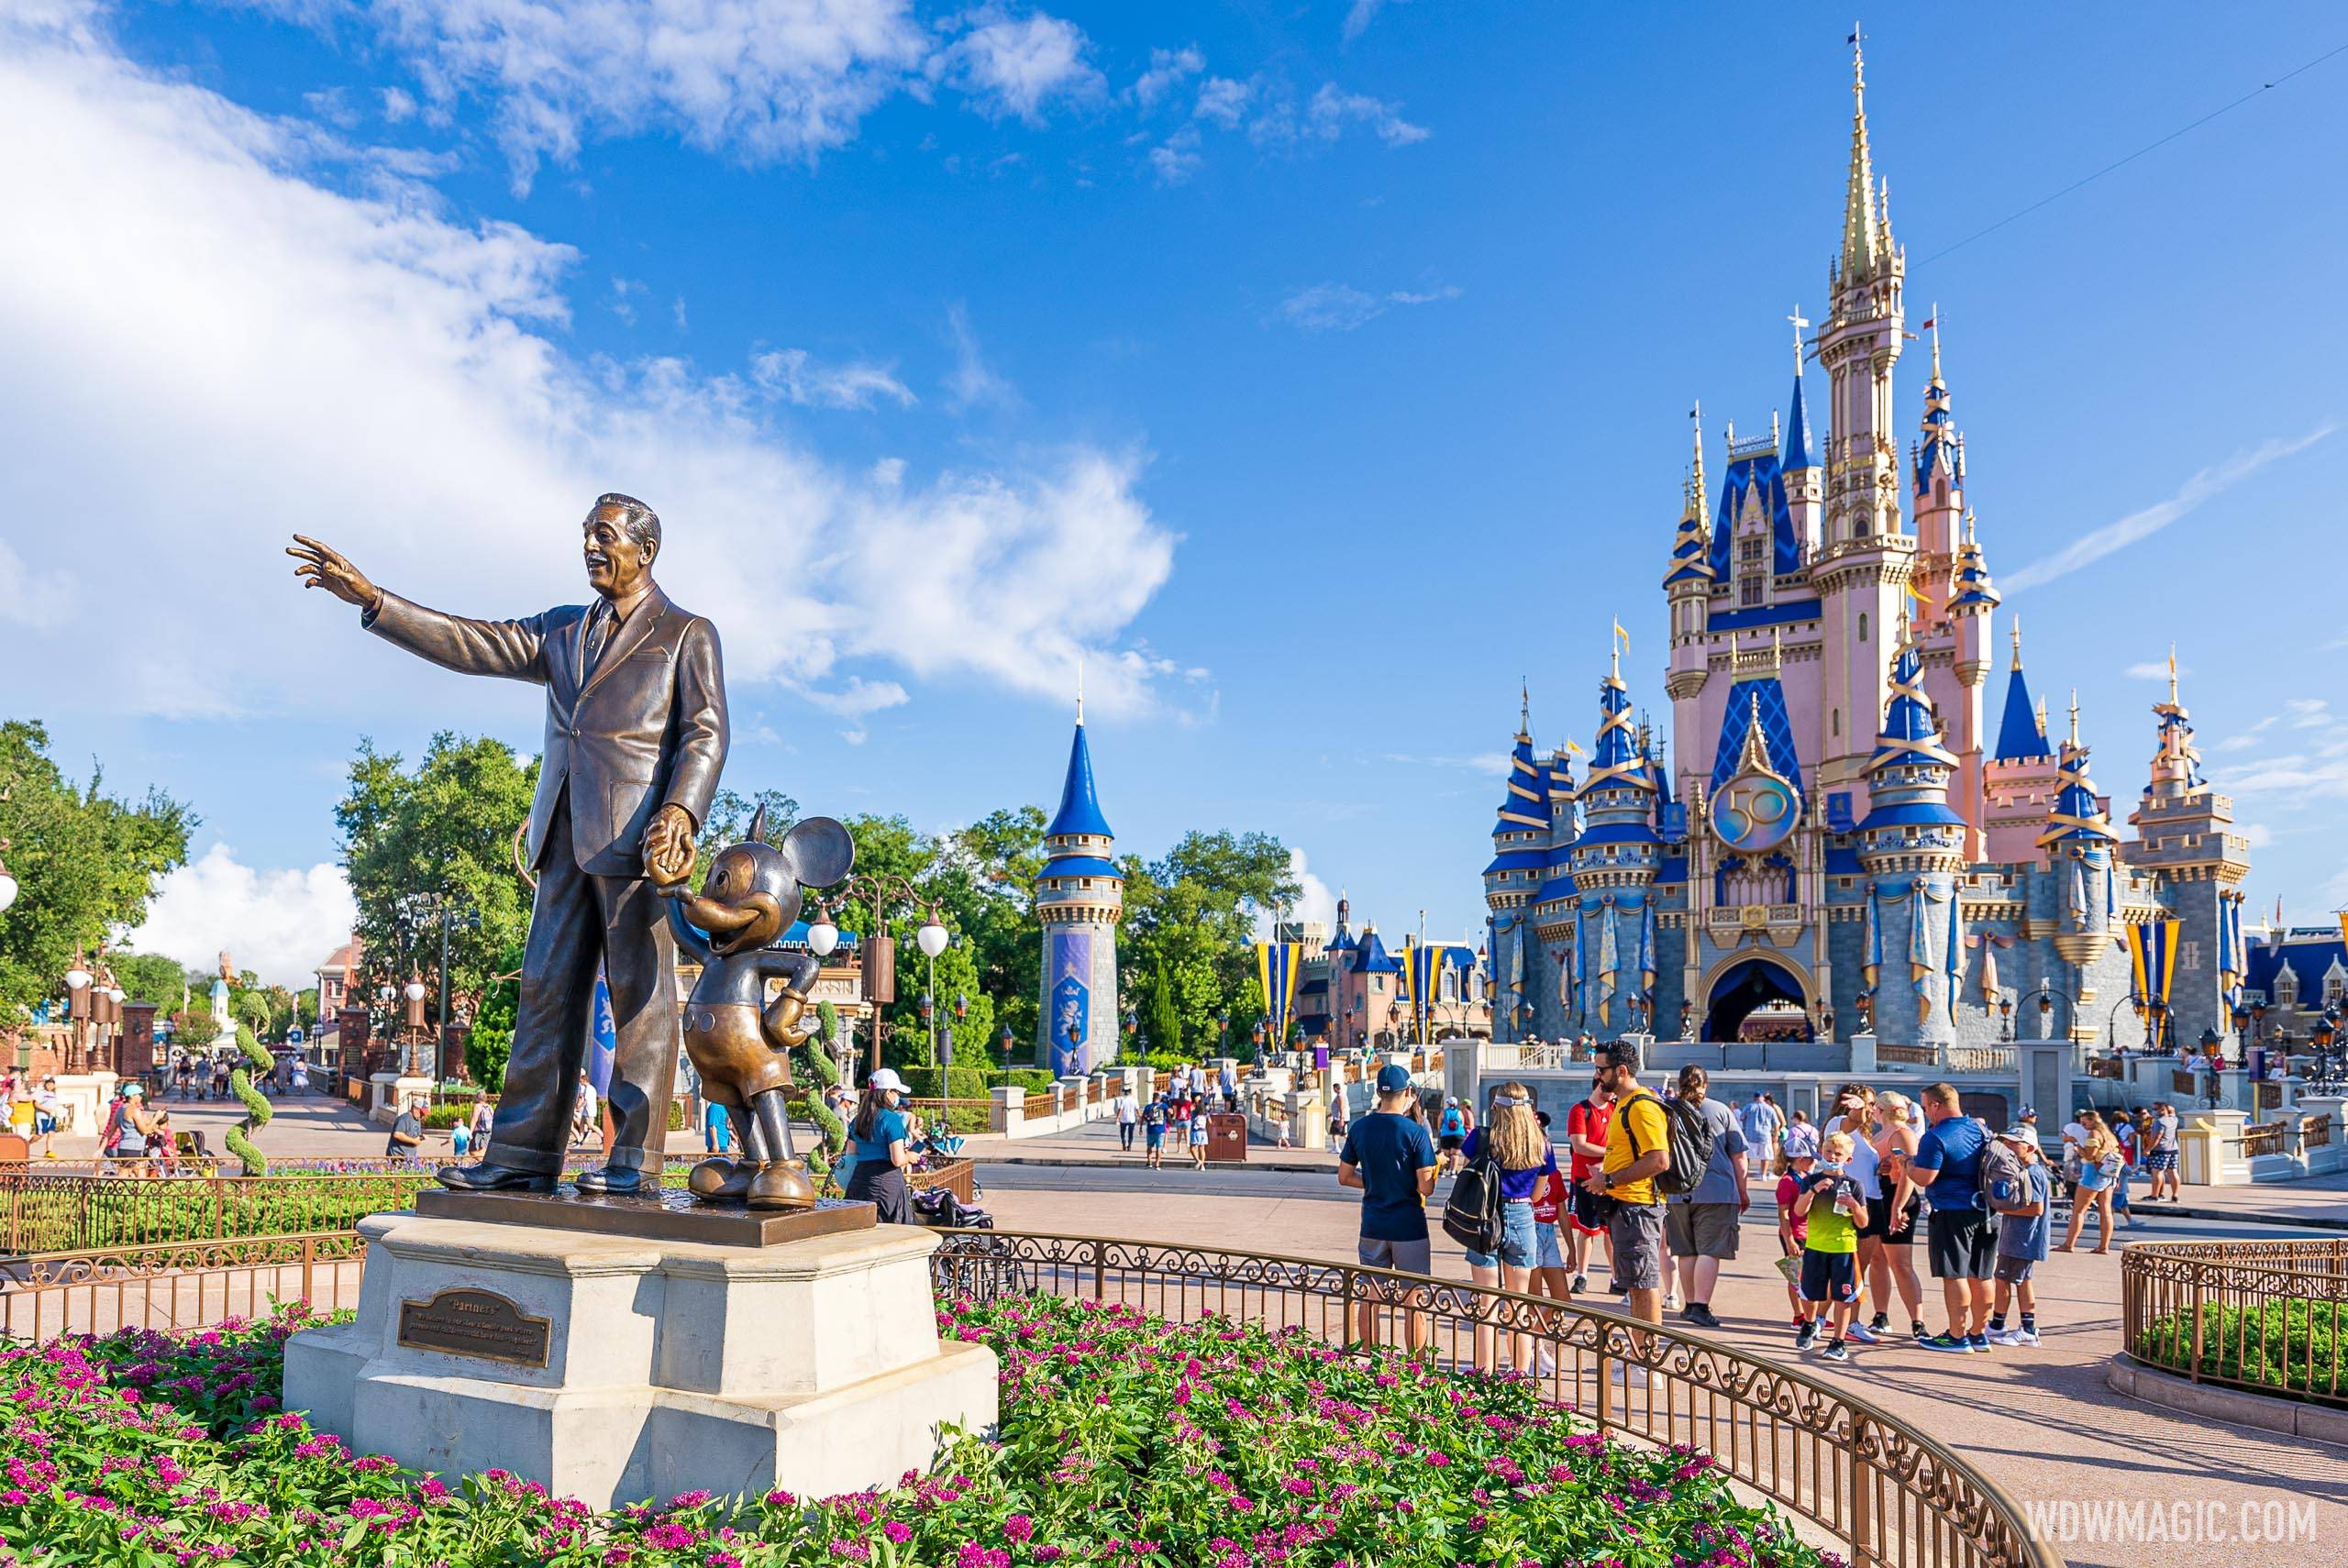 Park hours at Magic Kingdom For January 31 2023 are 8:00am to 4:30pm